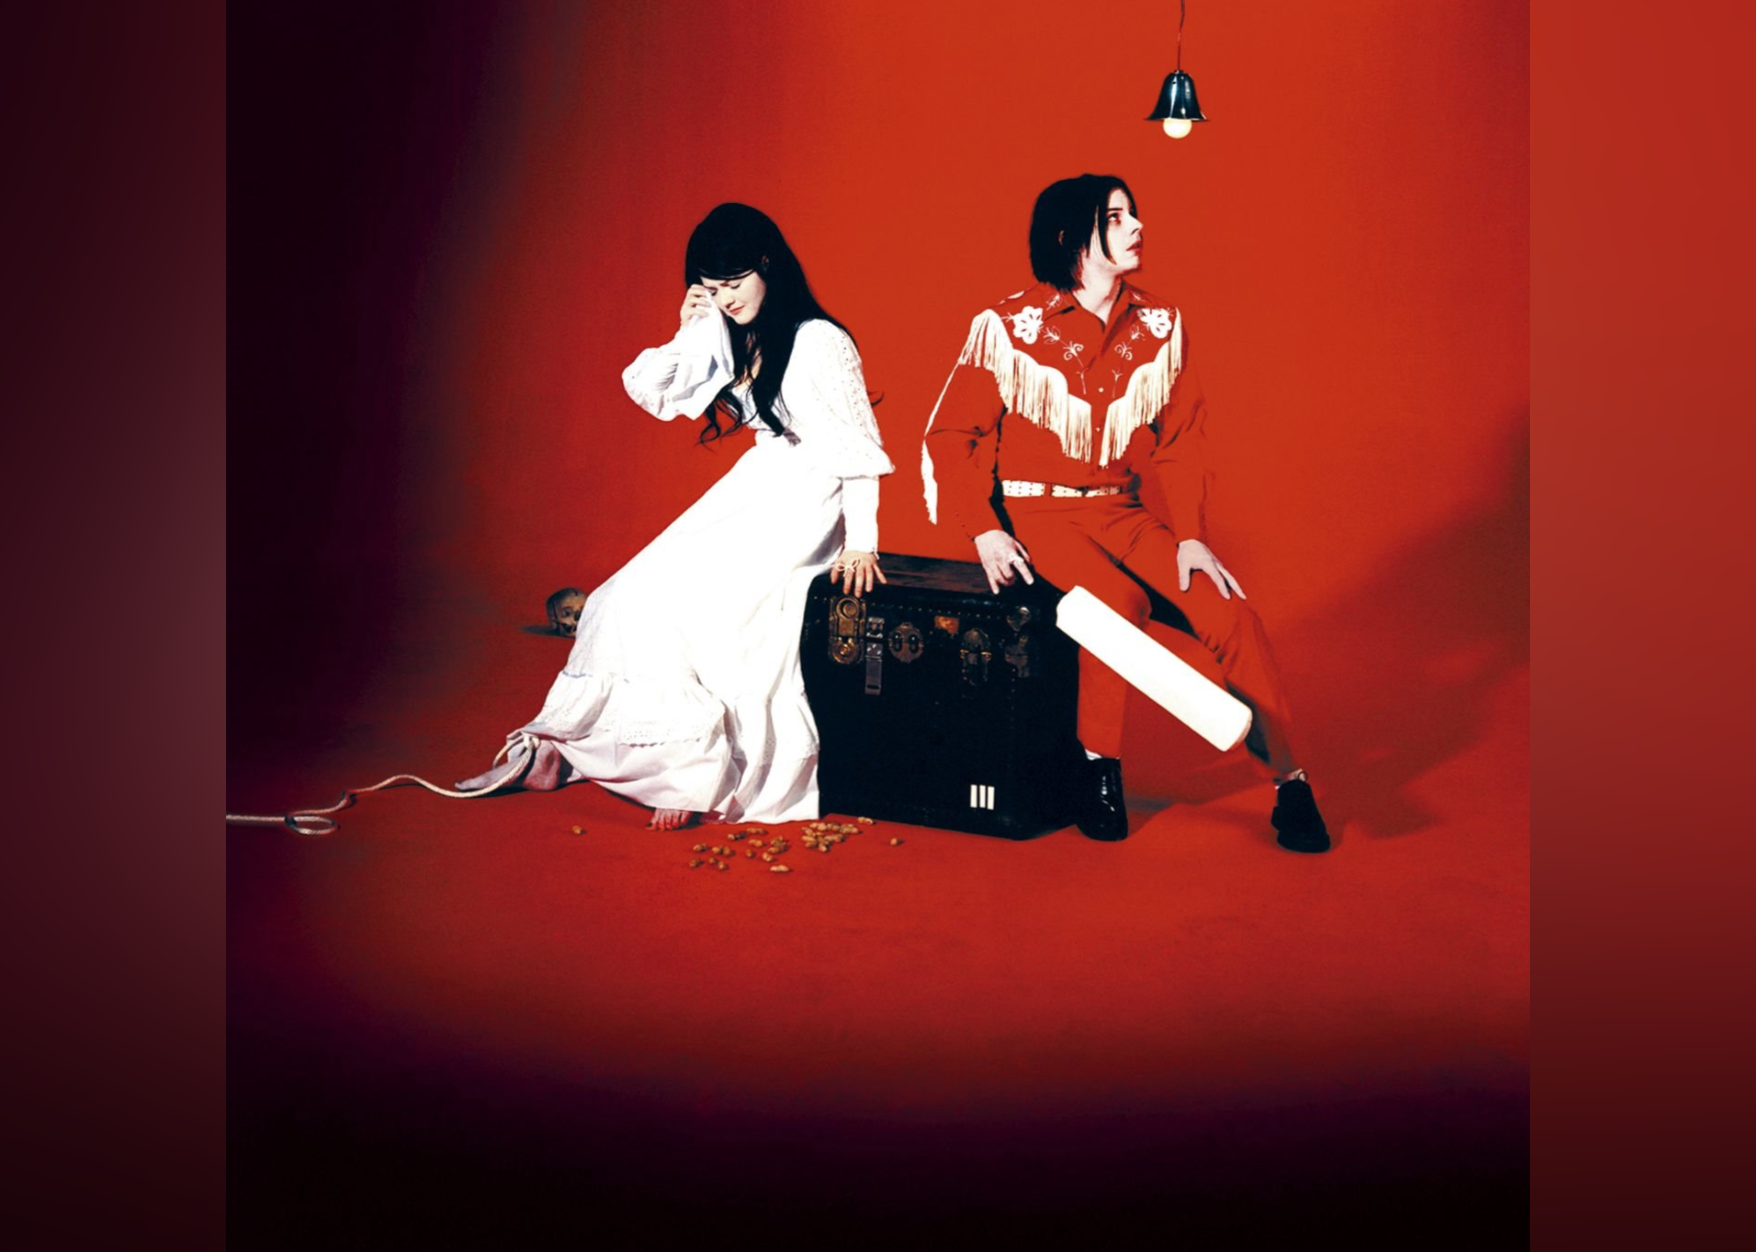 Meg White wearing a white dress and crying sitting on a trunk next to Jack White in a red western outfit holding a paddle.